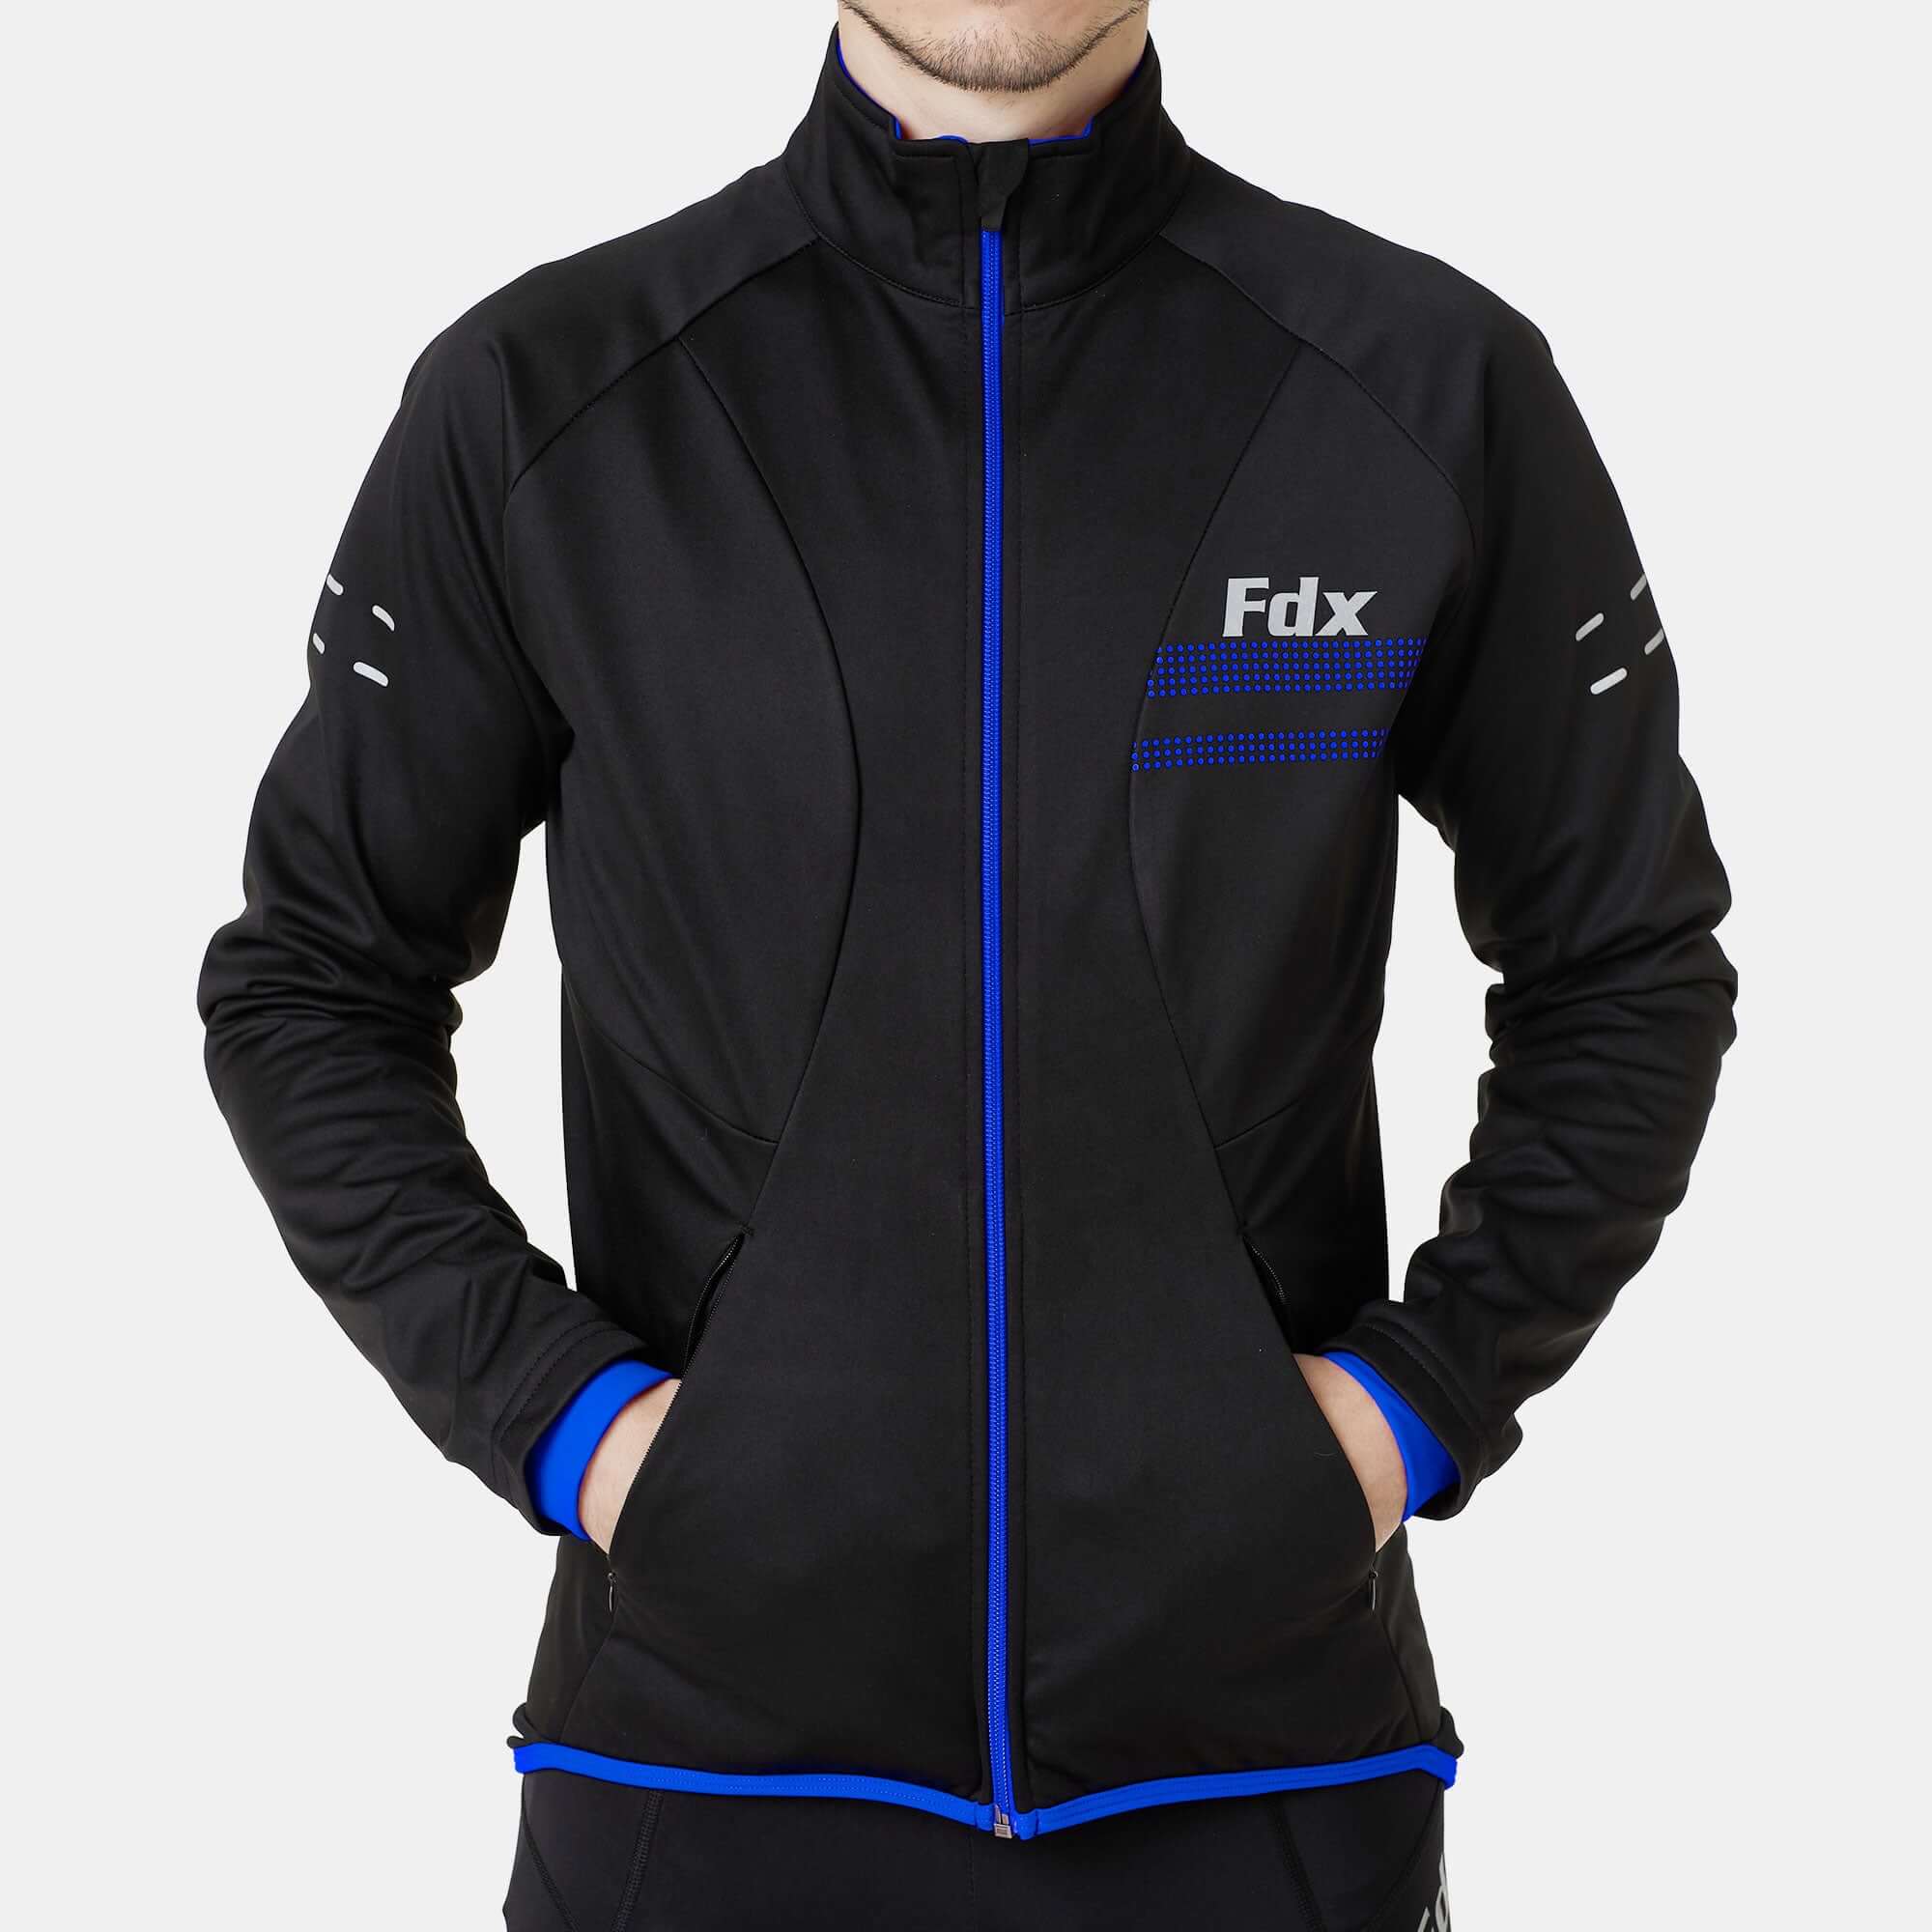 Fdx Arch Men's Blue Windproof & Water Resistant Cycling Jacket